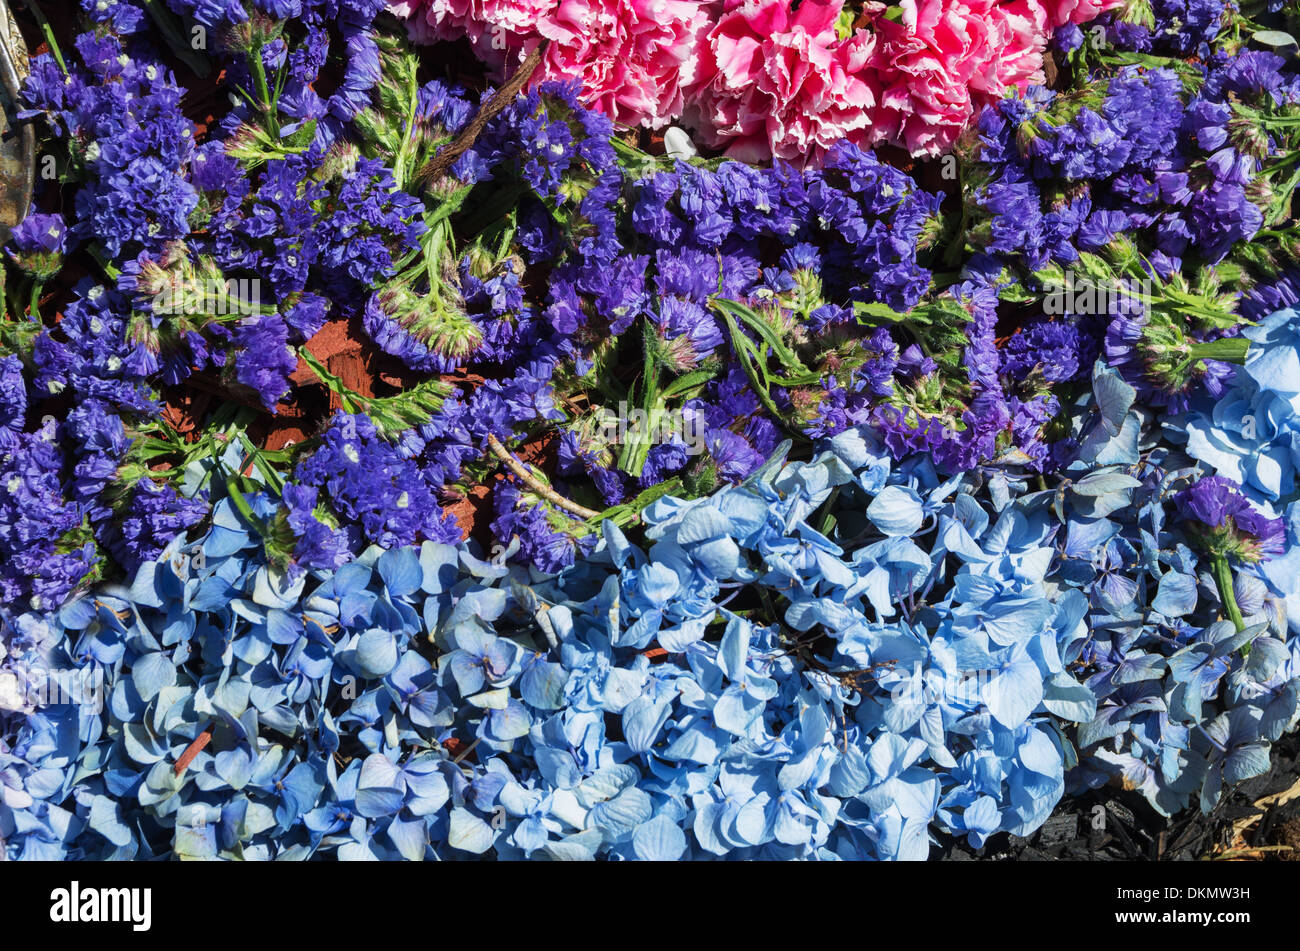 flower background with stripes of different colored flowers Stock Photo